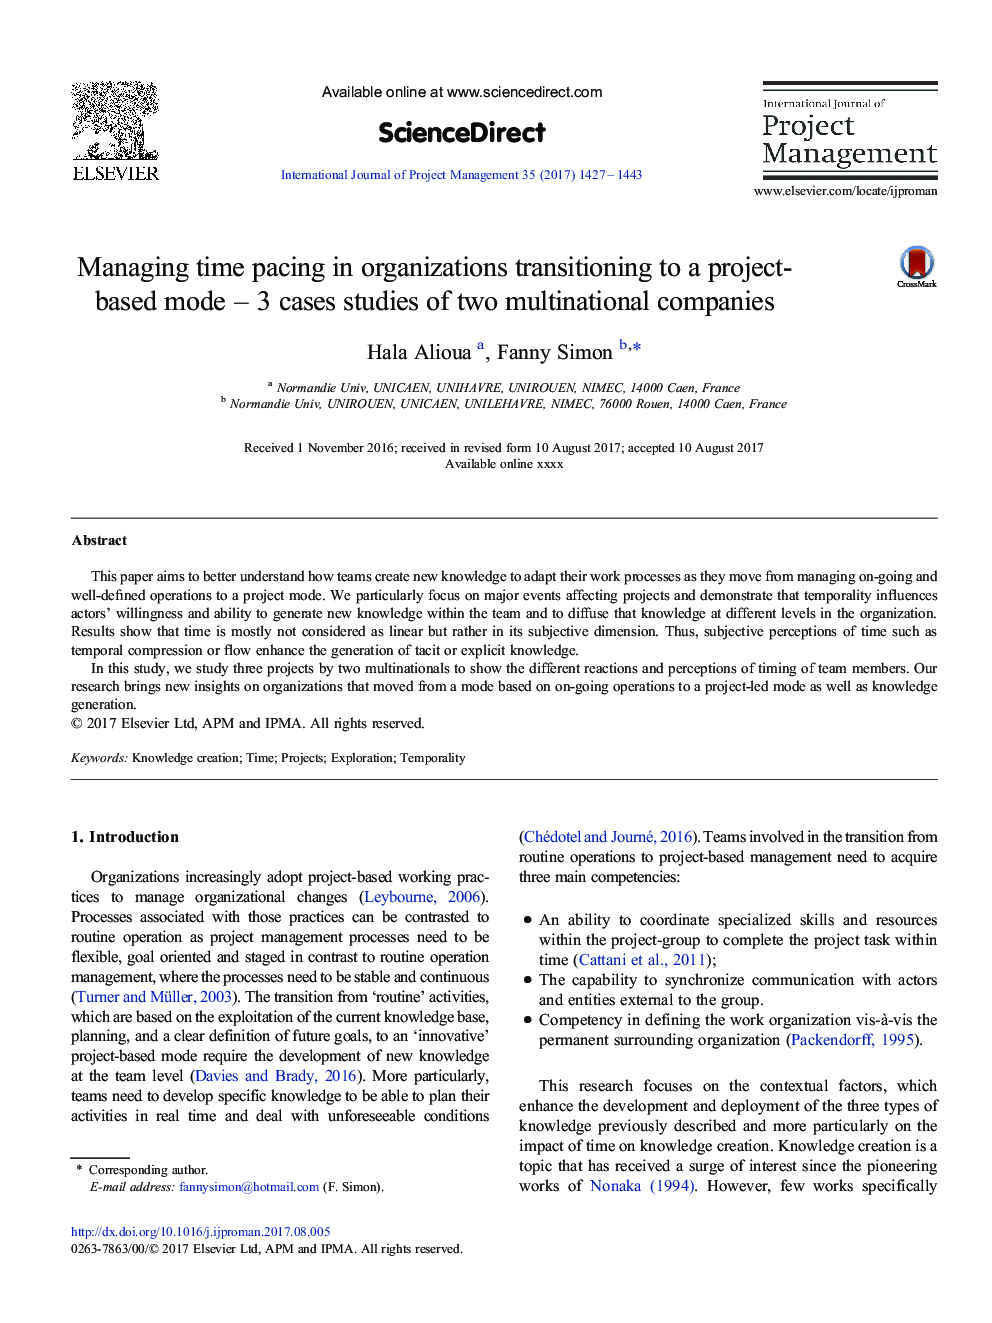 Managing time pacing in organizations transitioning to a project-based mode - 3 cases studies of two multinational companies